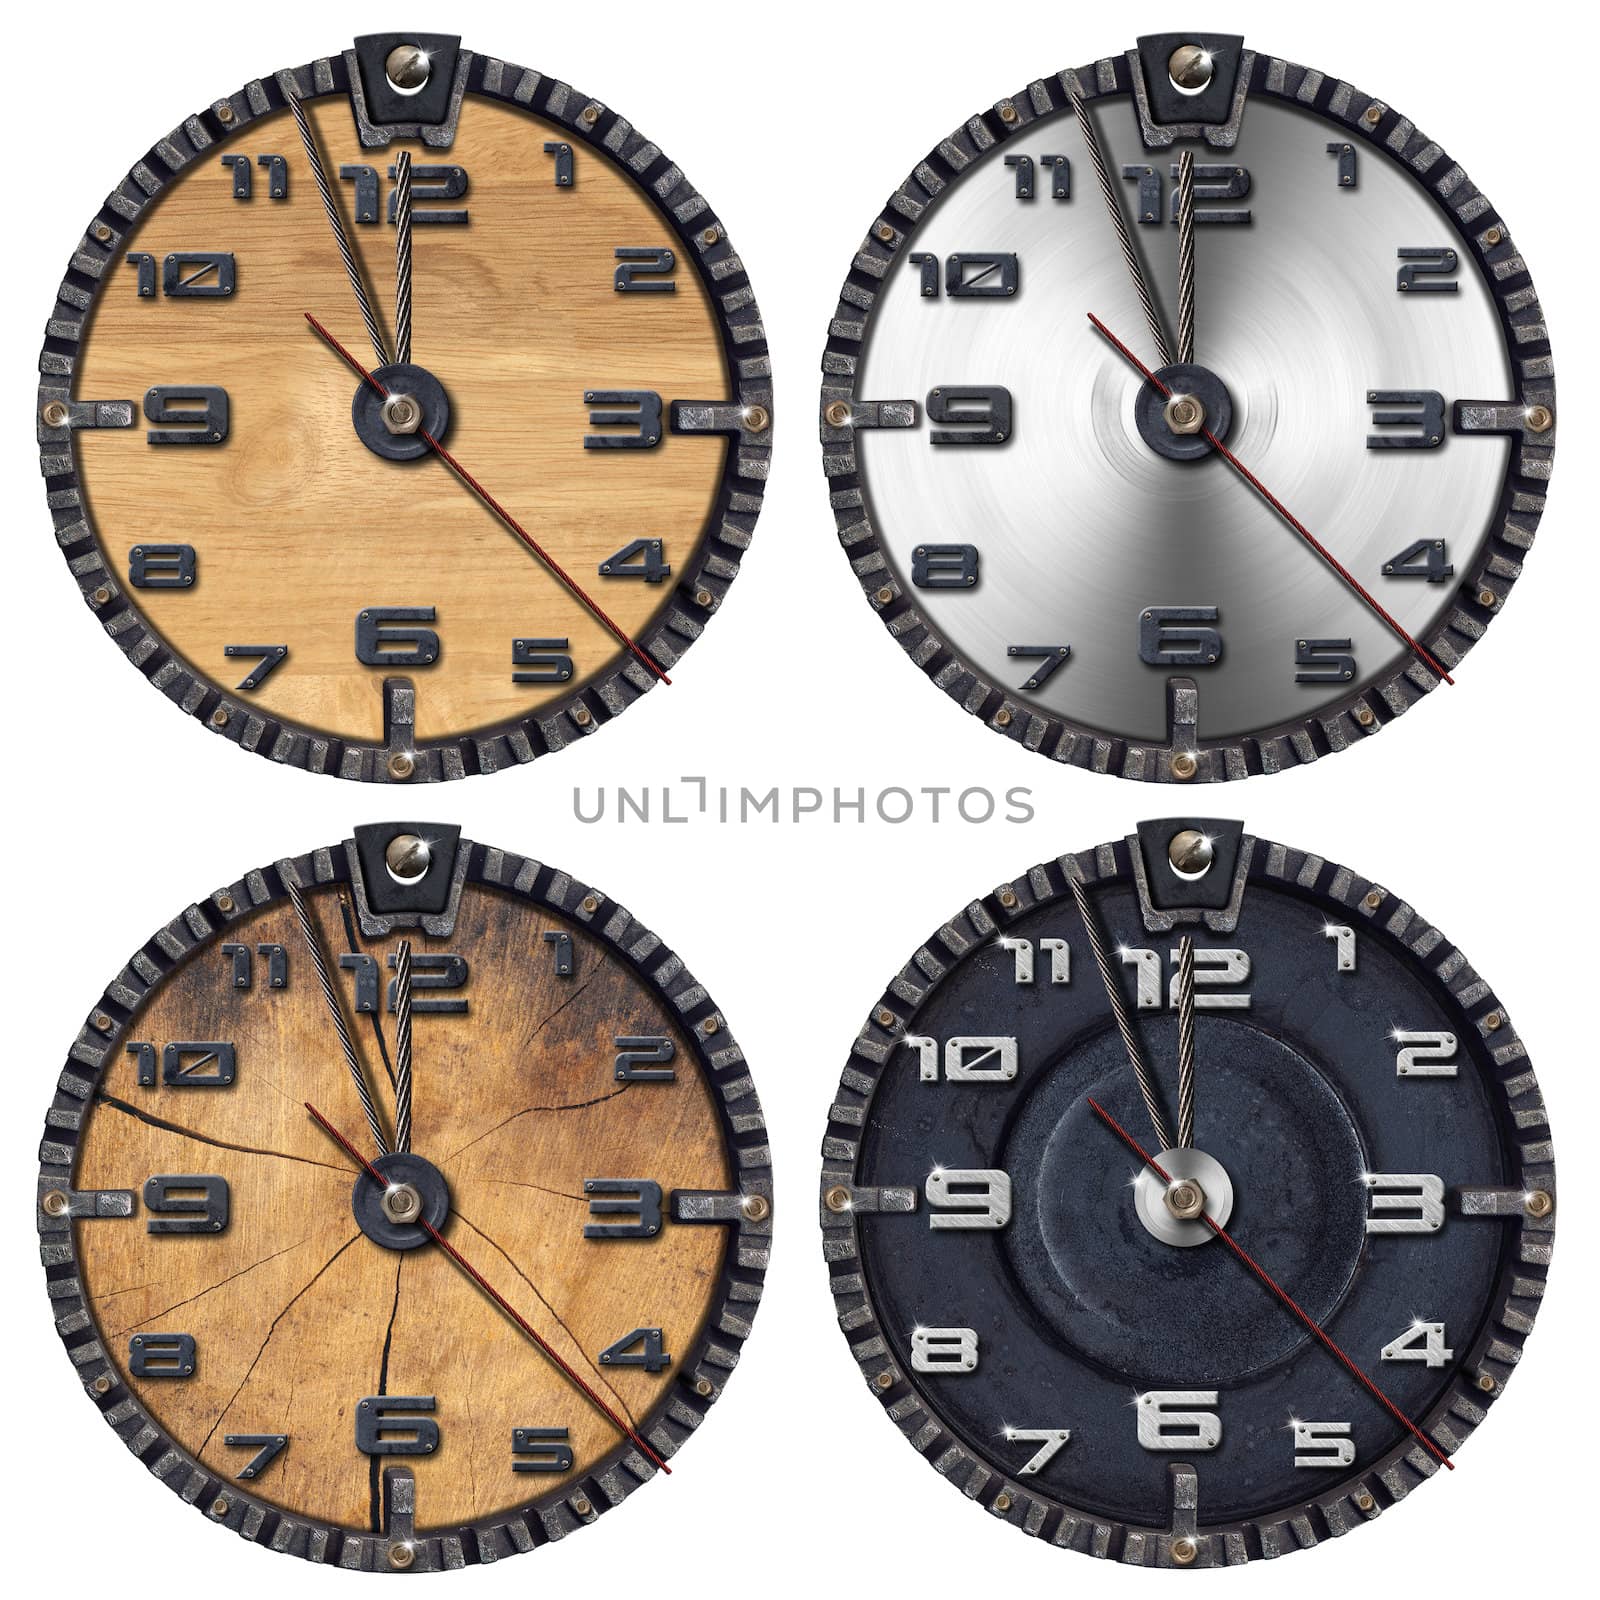 Collection of wooden and metallic grunge clocks on white background

